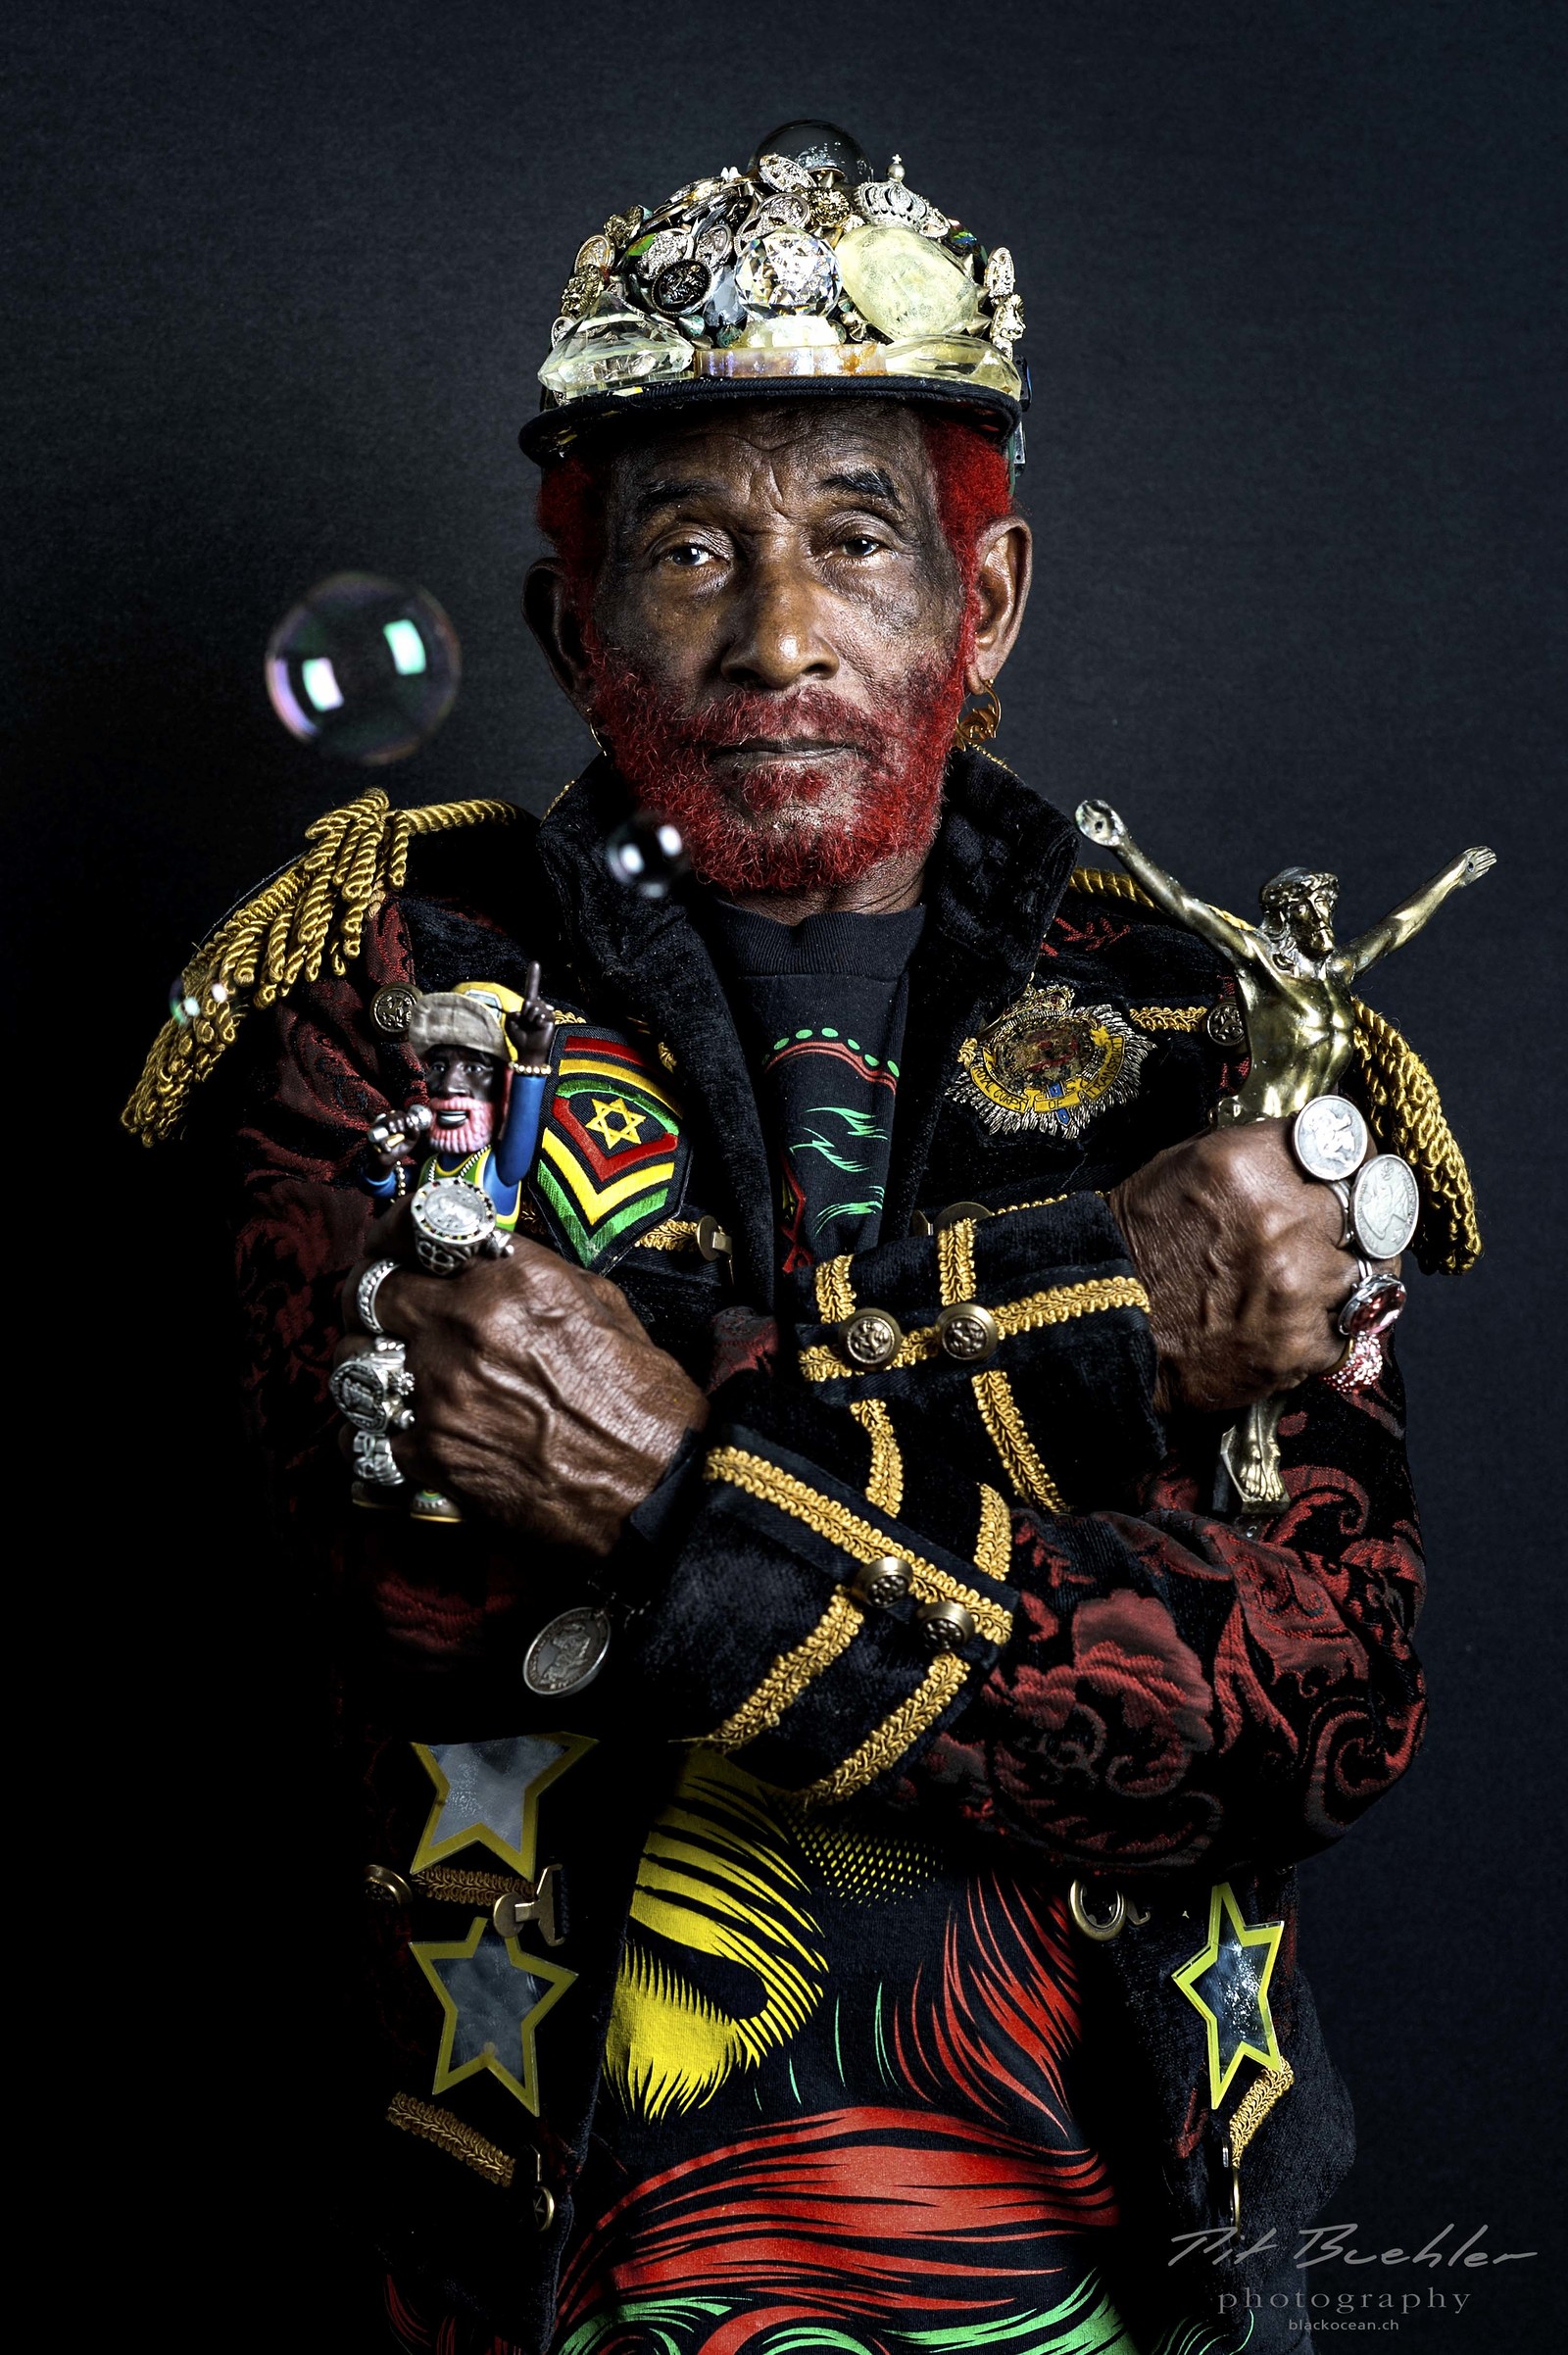 LEE 'Scratch' PERRY at Fiddlers